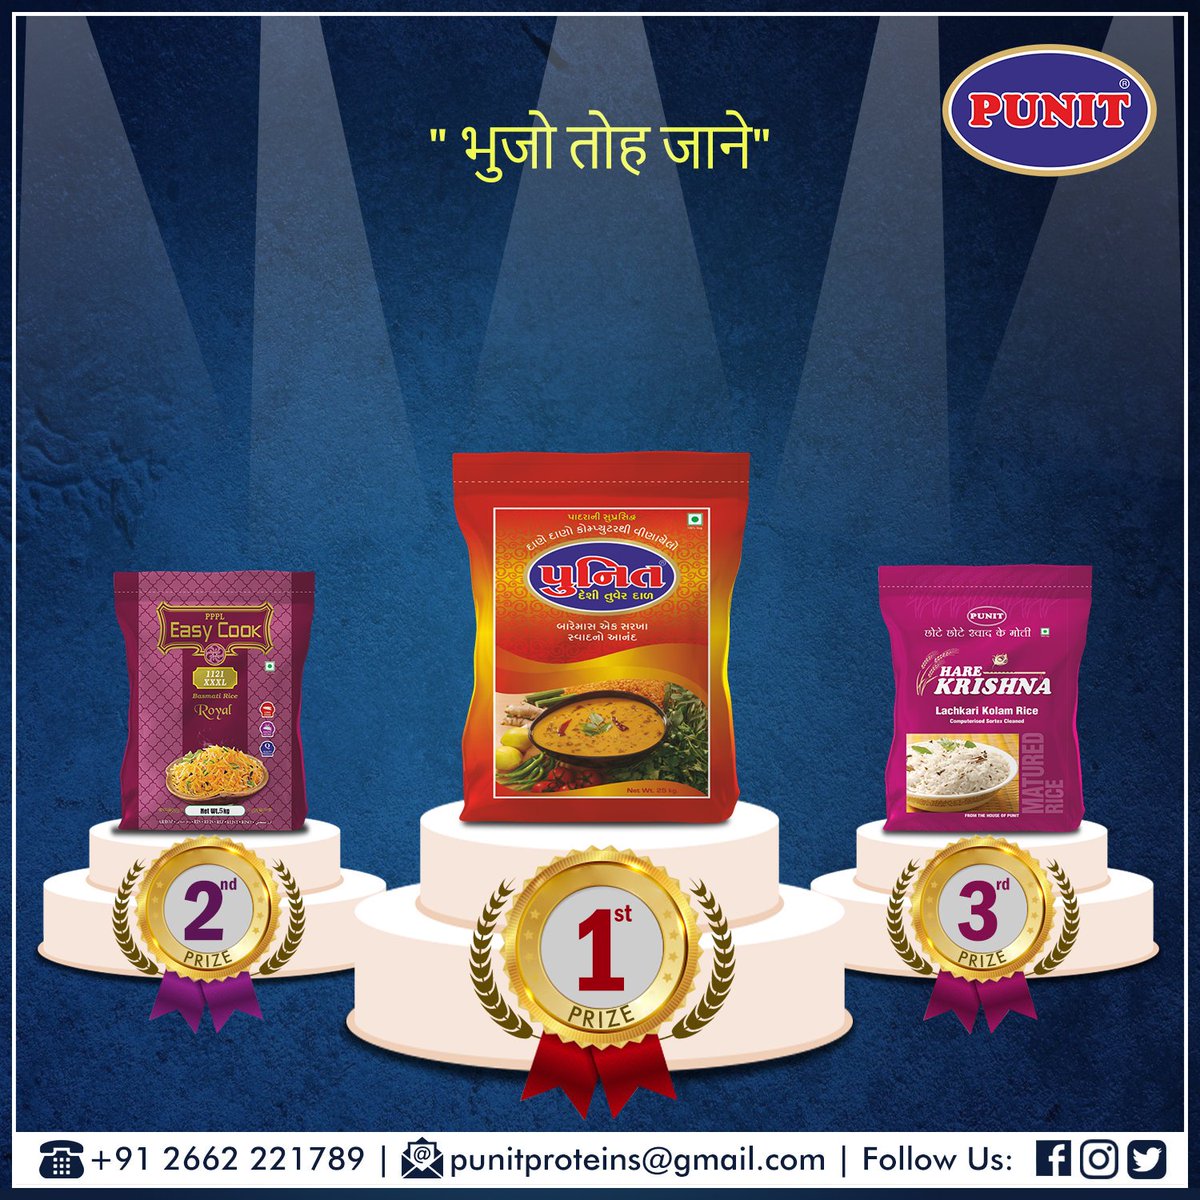 #ContestAlert
Participate and get a chance to win the exciting prizes.
.
#Contest #ContestIndia #Contestchampions #PunitProteins #Punit #PunitToorDal #ToorDal #BasmatiRice #ChanaDal #Wheat #Rice #Grains #Proteins #Health #pulses